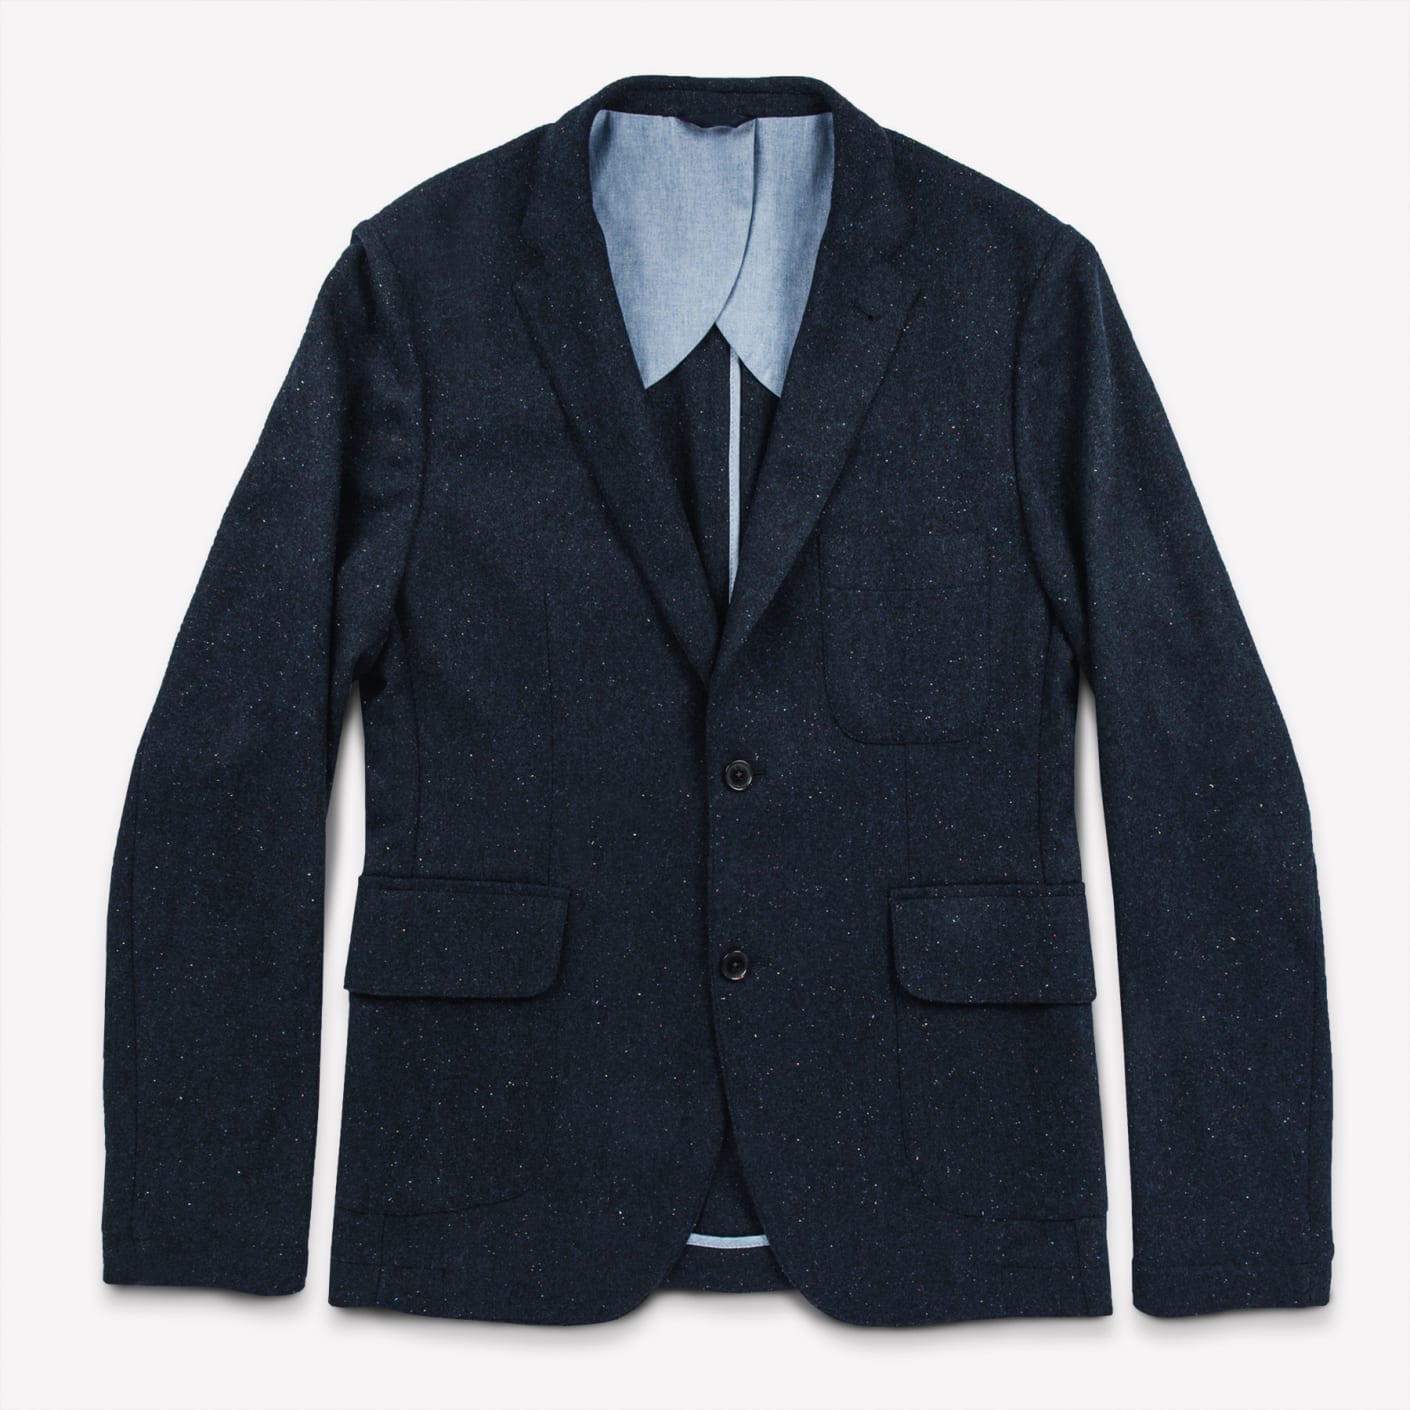 Taylor Stitch The Telegraph Jacket, Navy Donegal | Bespoke Post